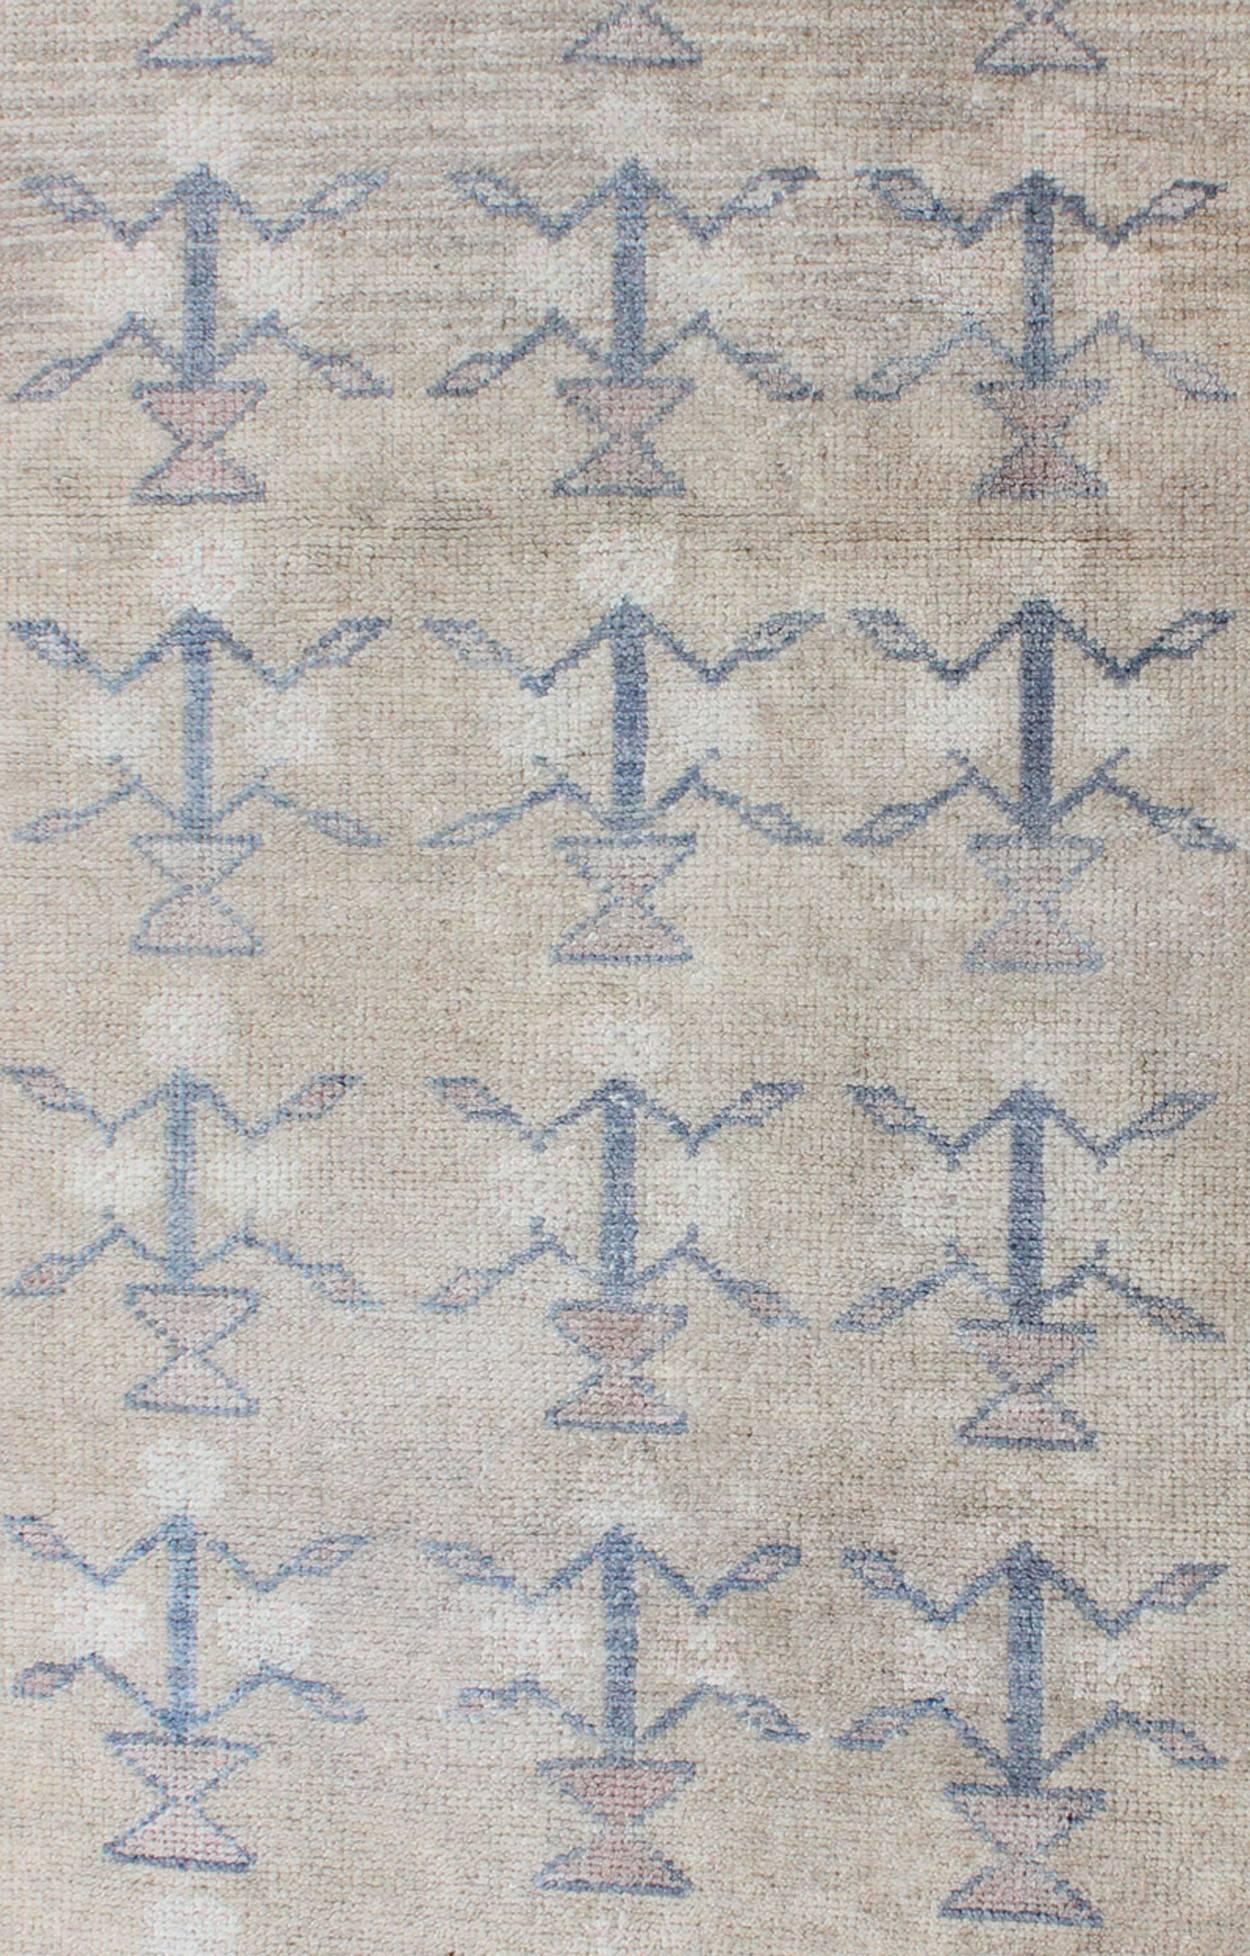 Hand-Knotted Small Turkish Tulu Carpet with Blue Tribal Motifs in a Sand-Colored Field